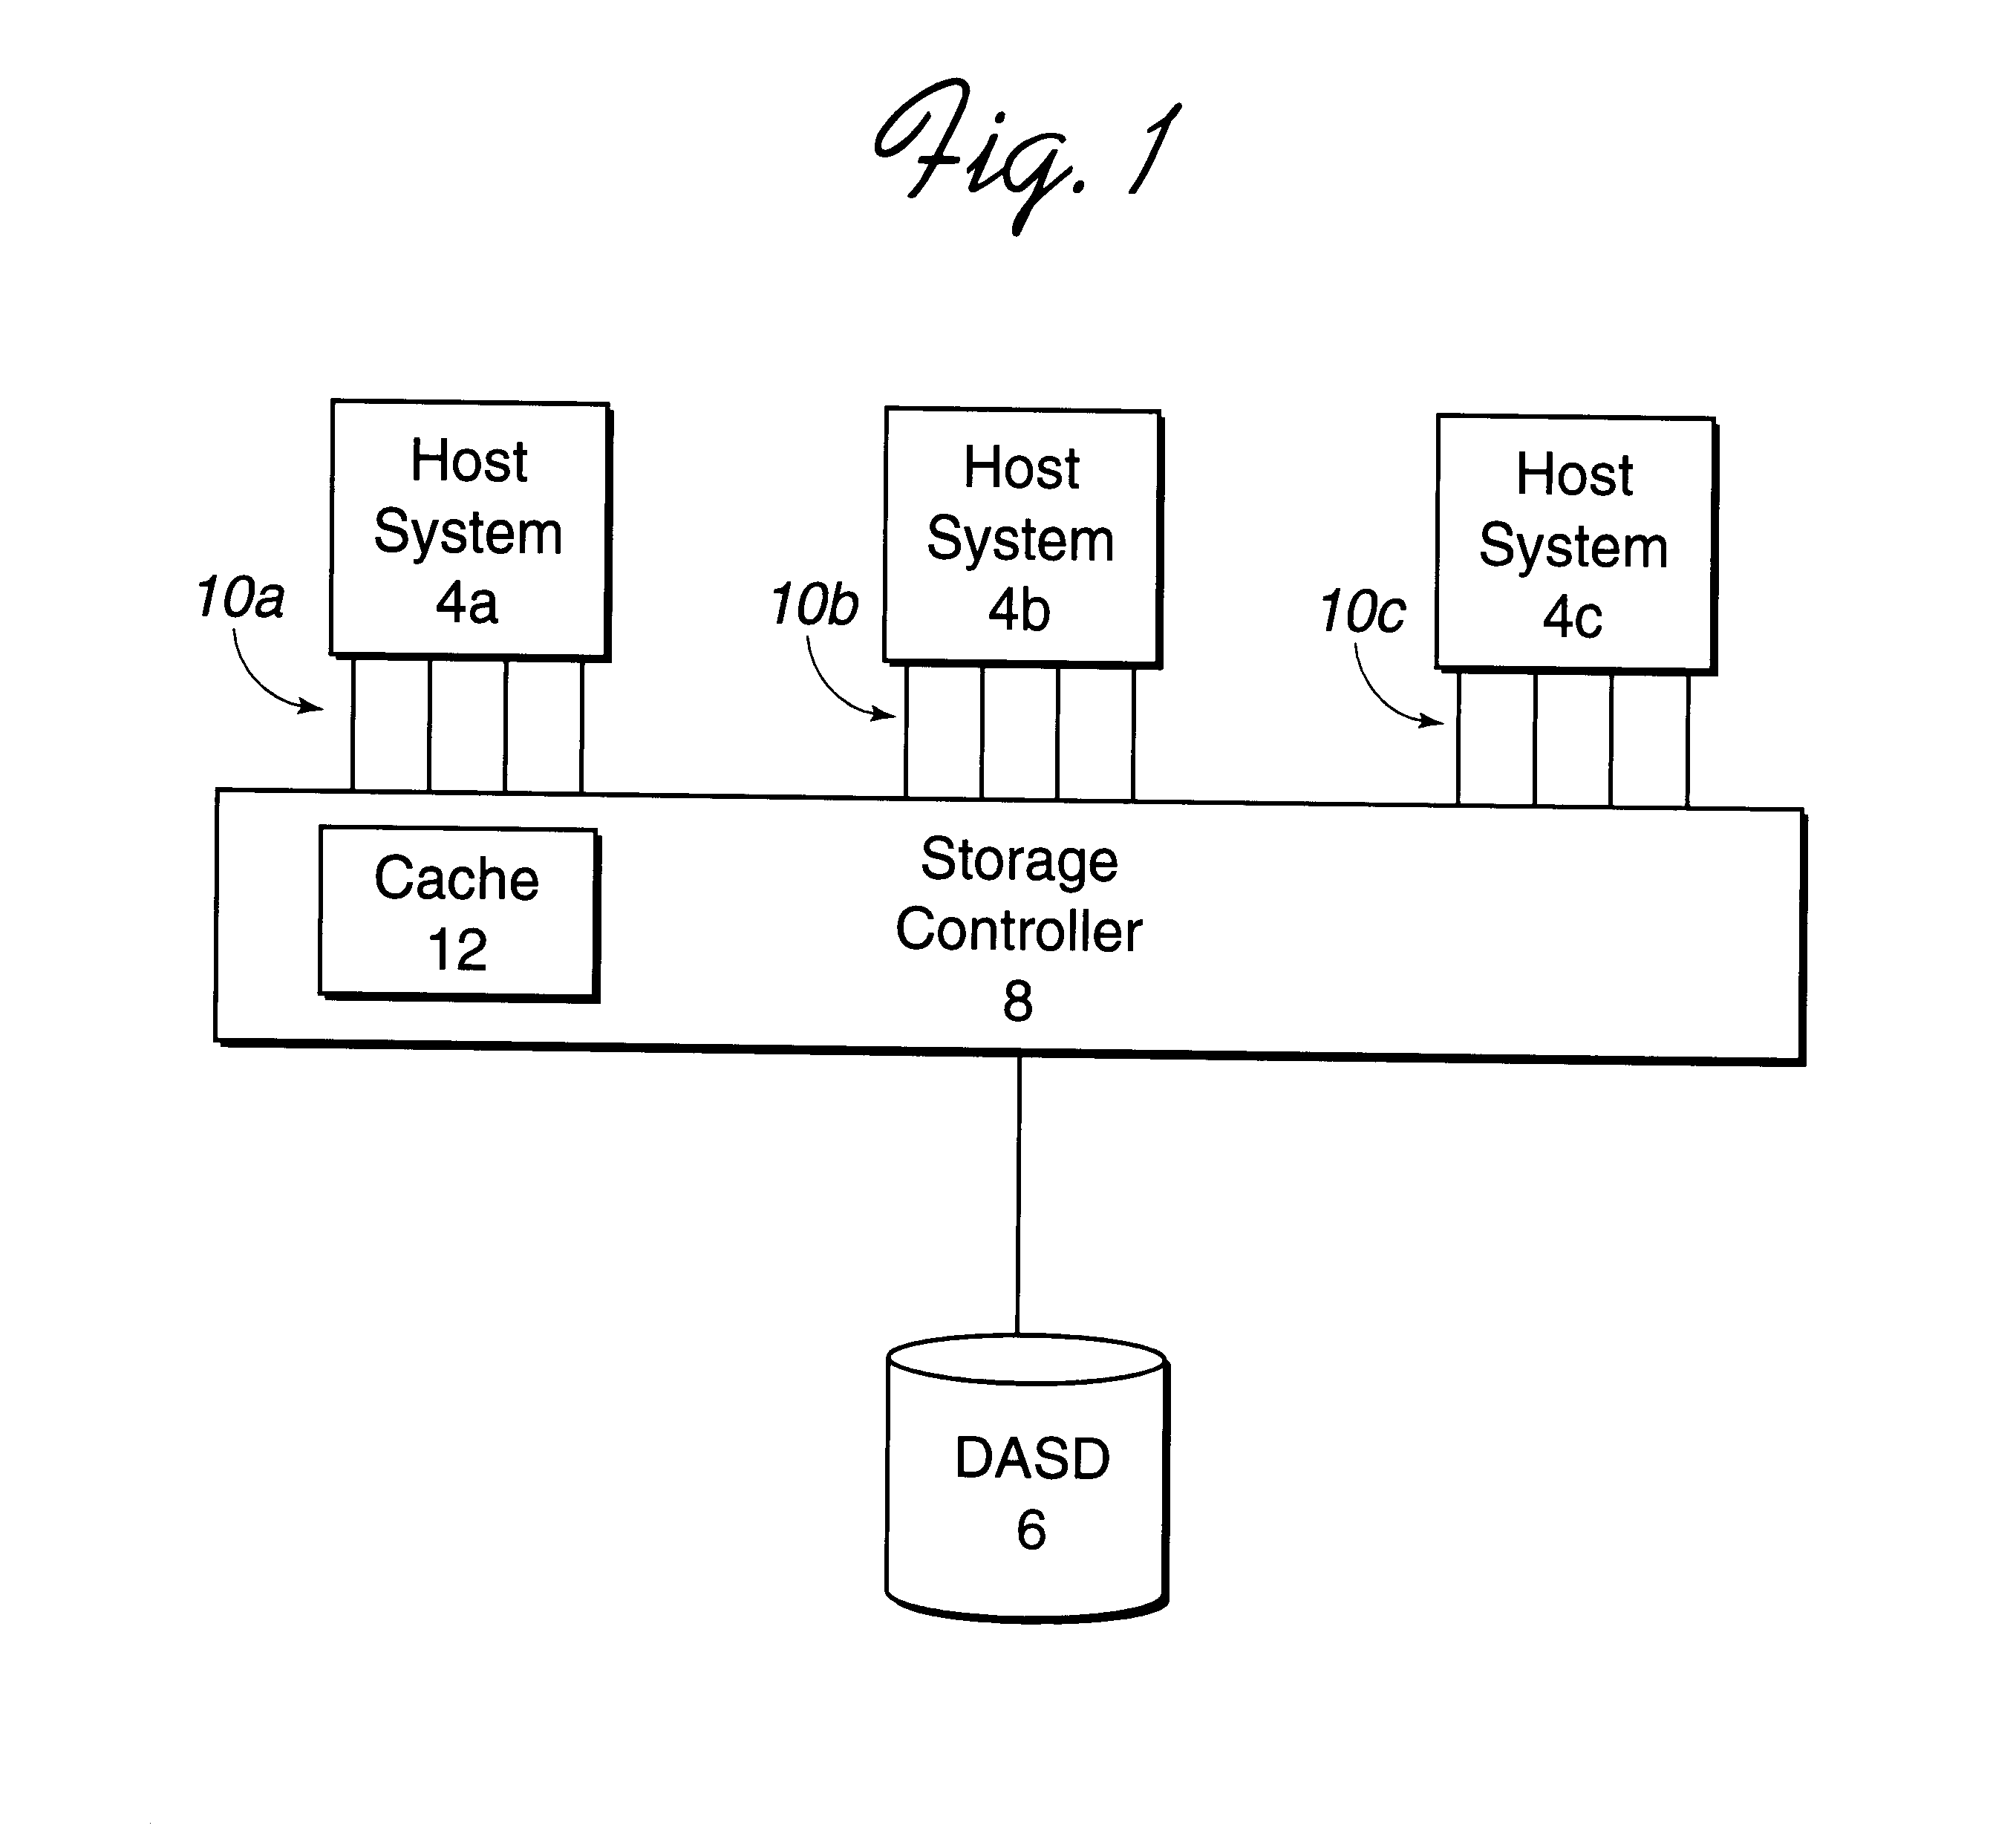 Input/output data access request with assigned priority handling